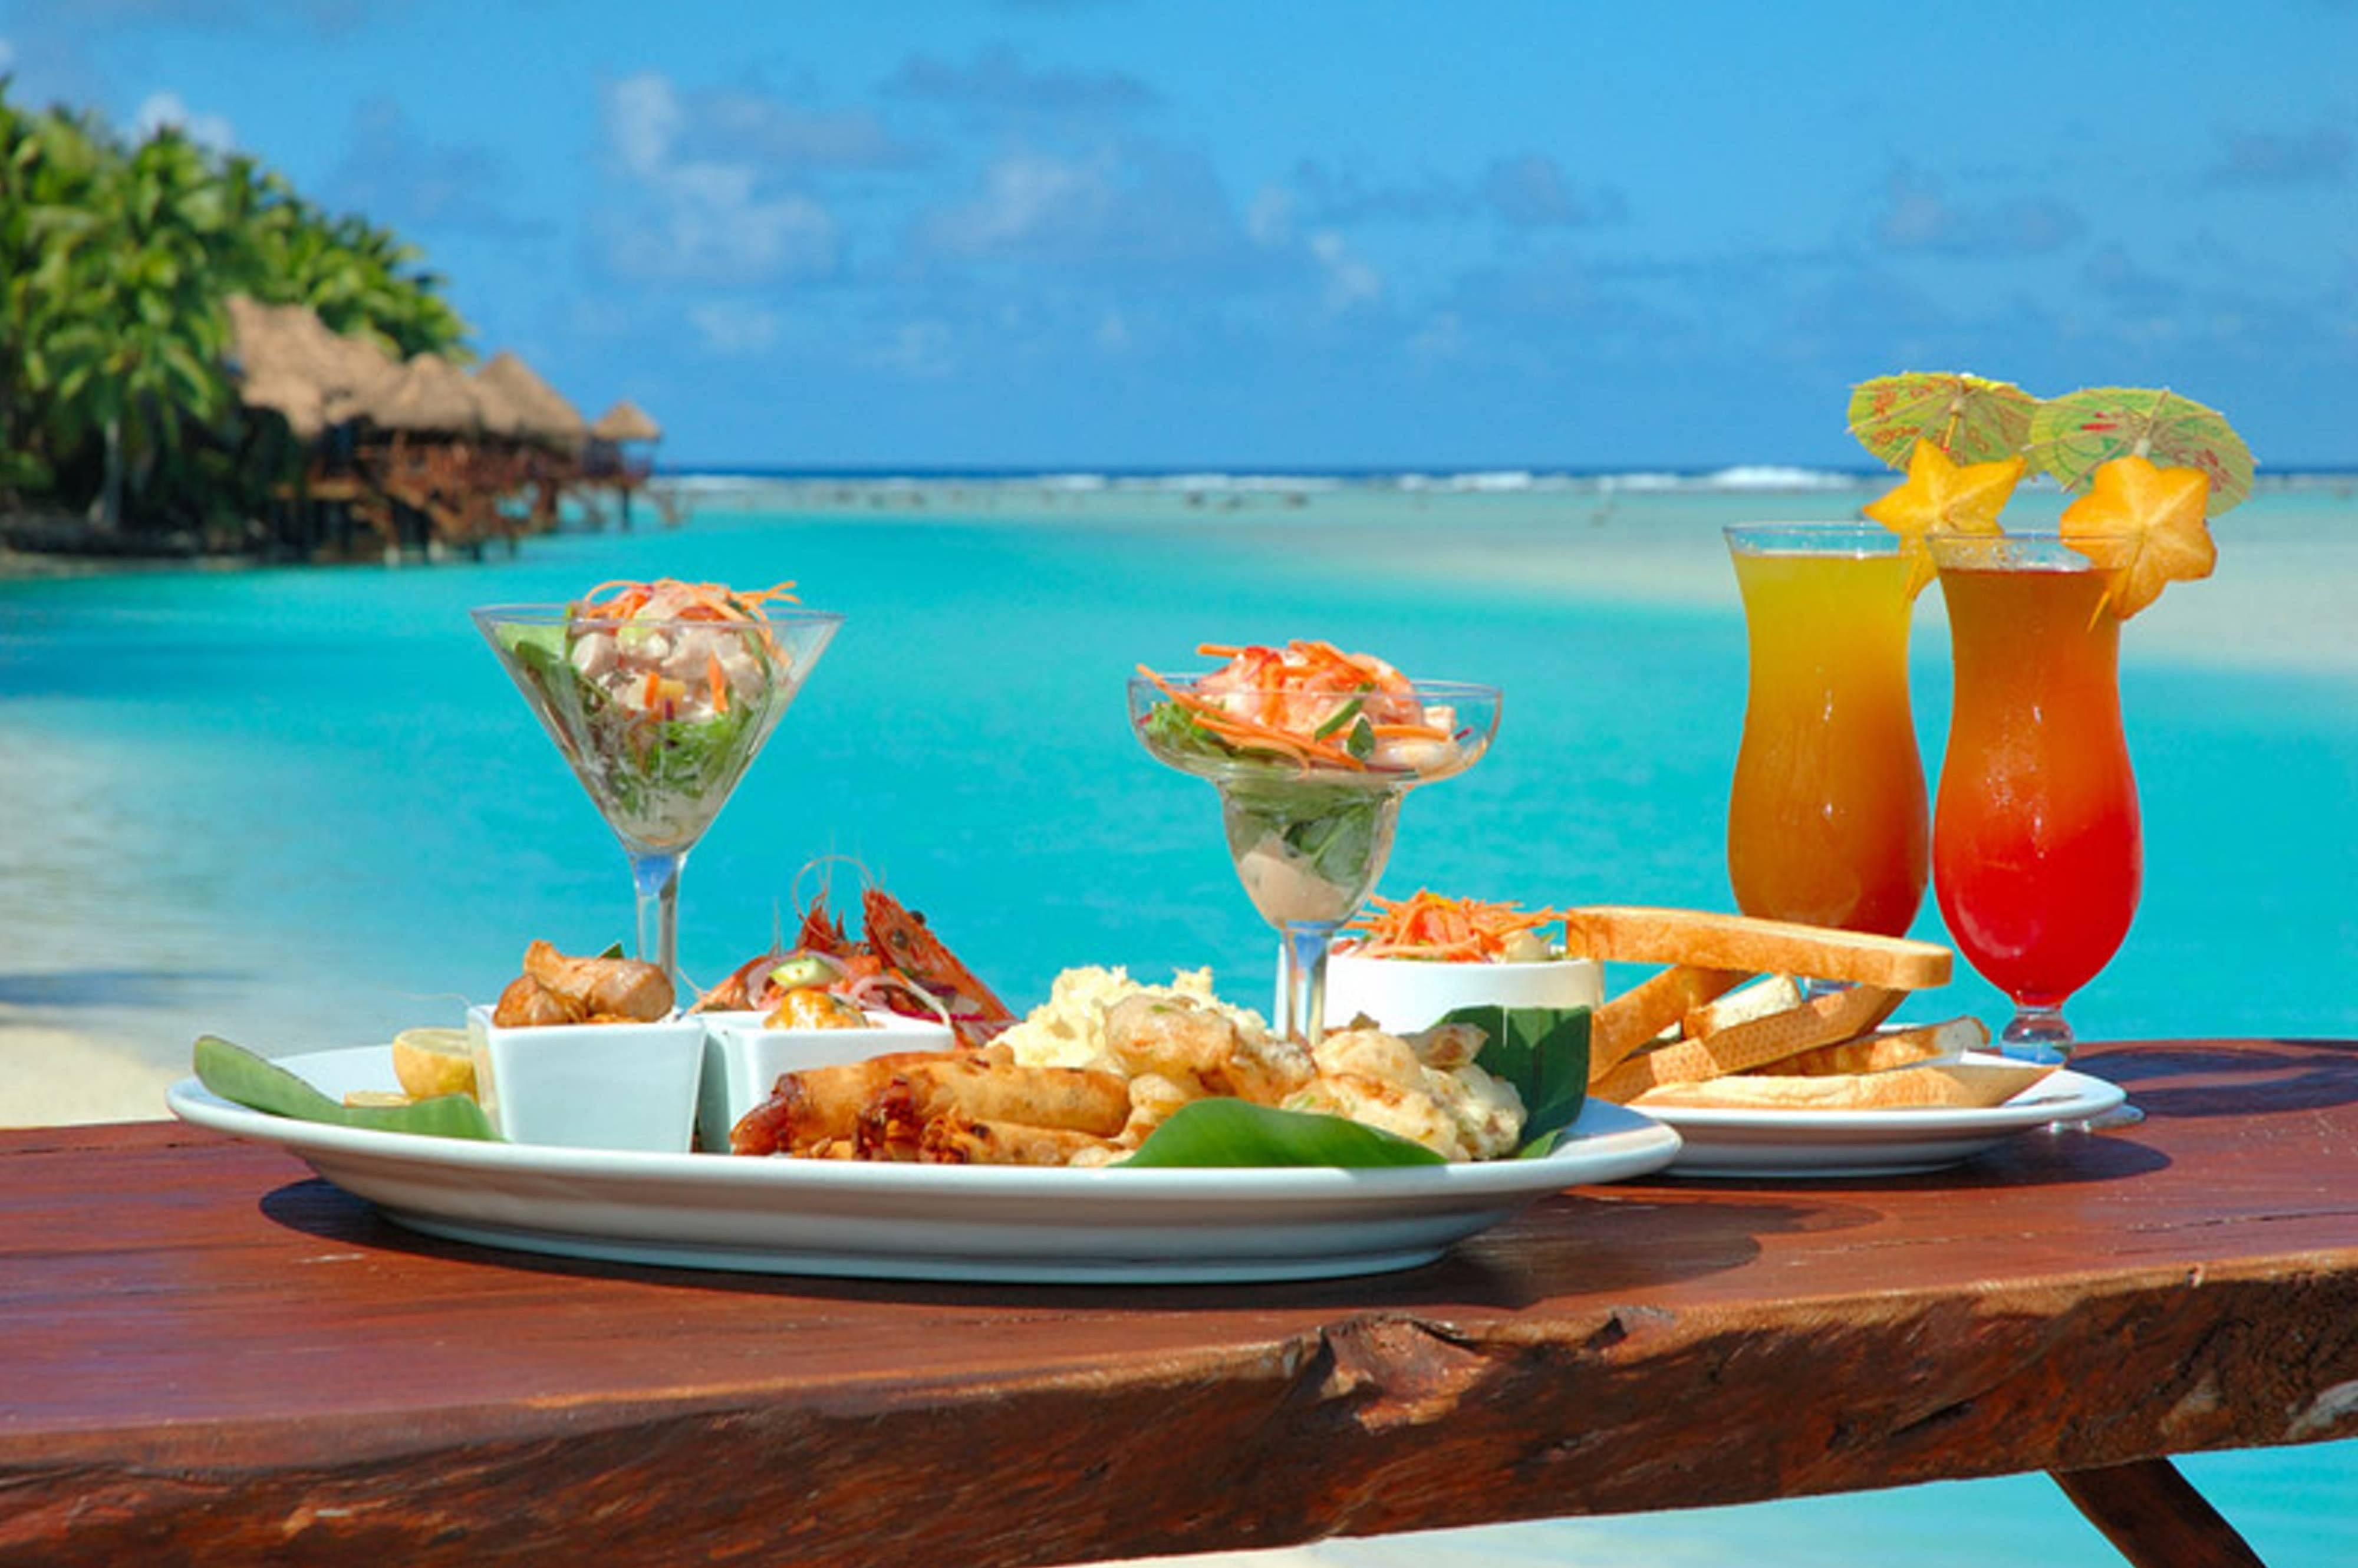 Lunch in The Cook Islands Wallpaper. Food and drink